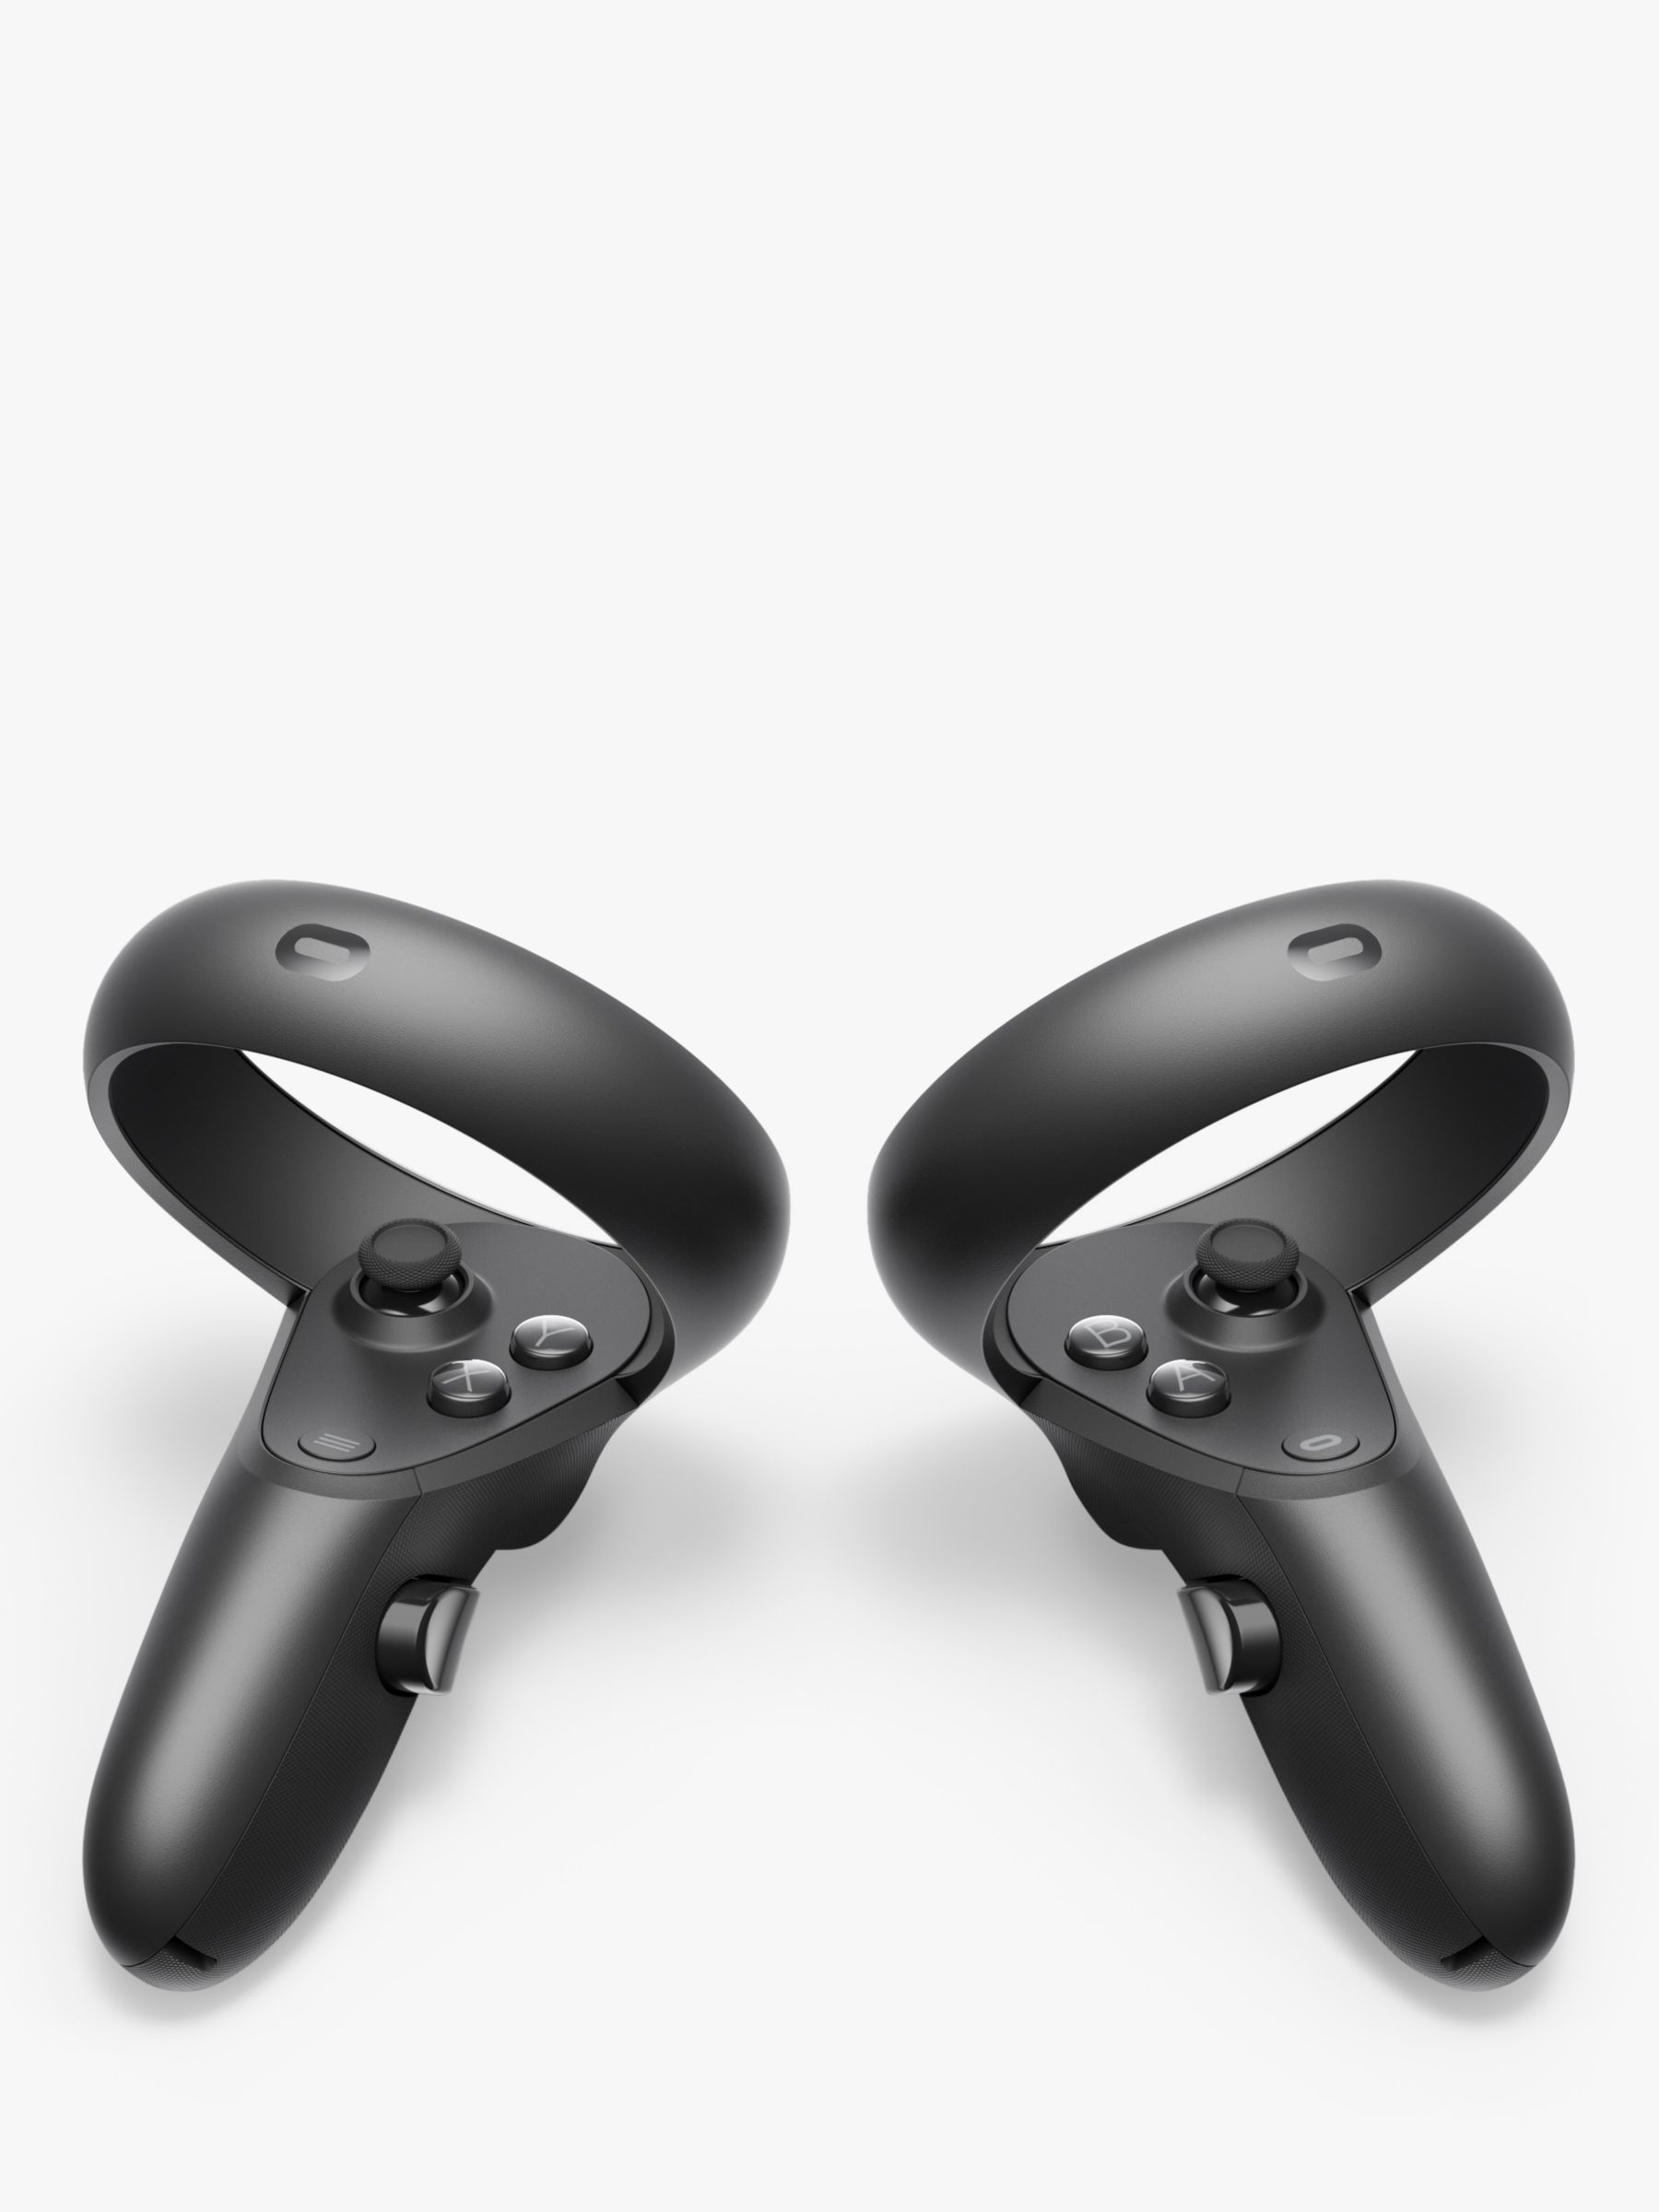 oculus rift and touch controllers